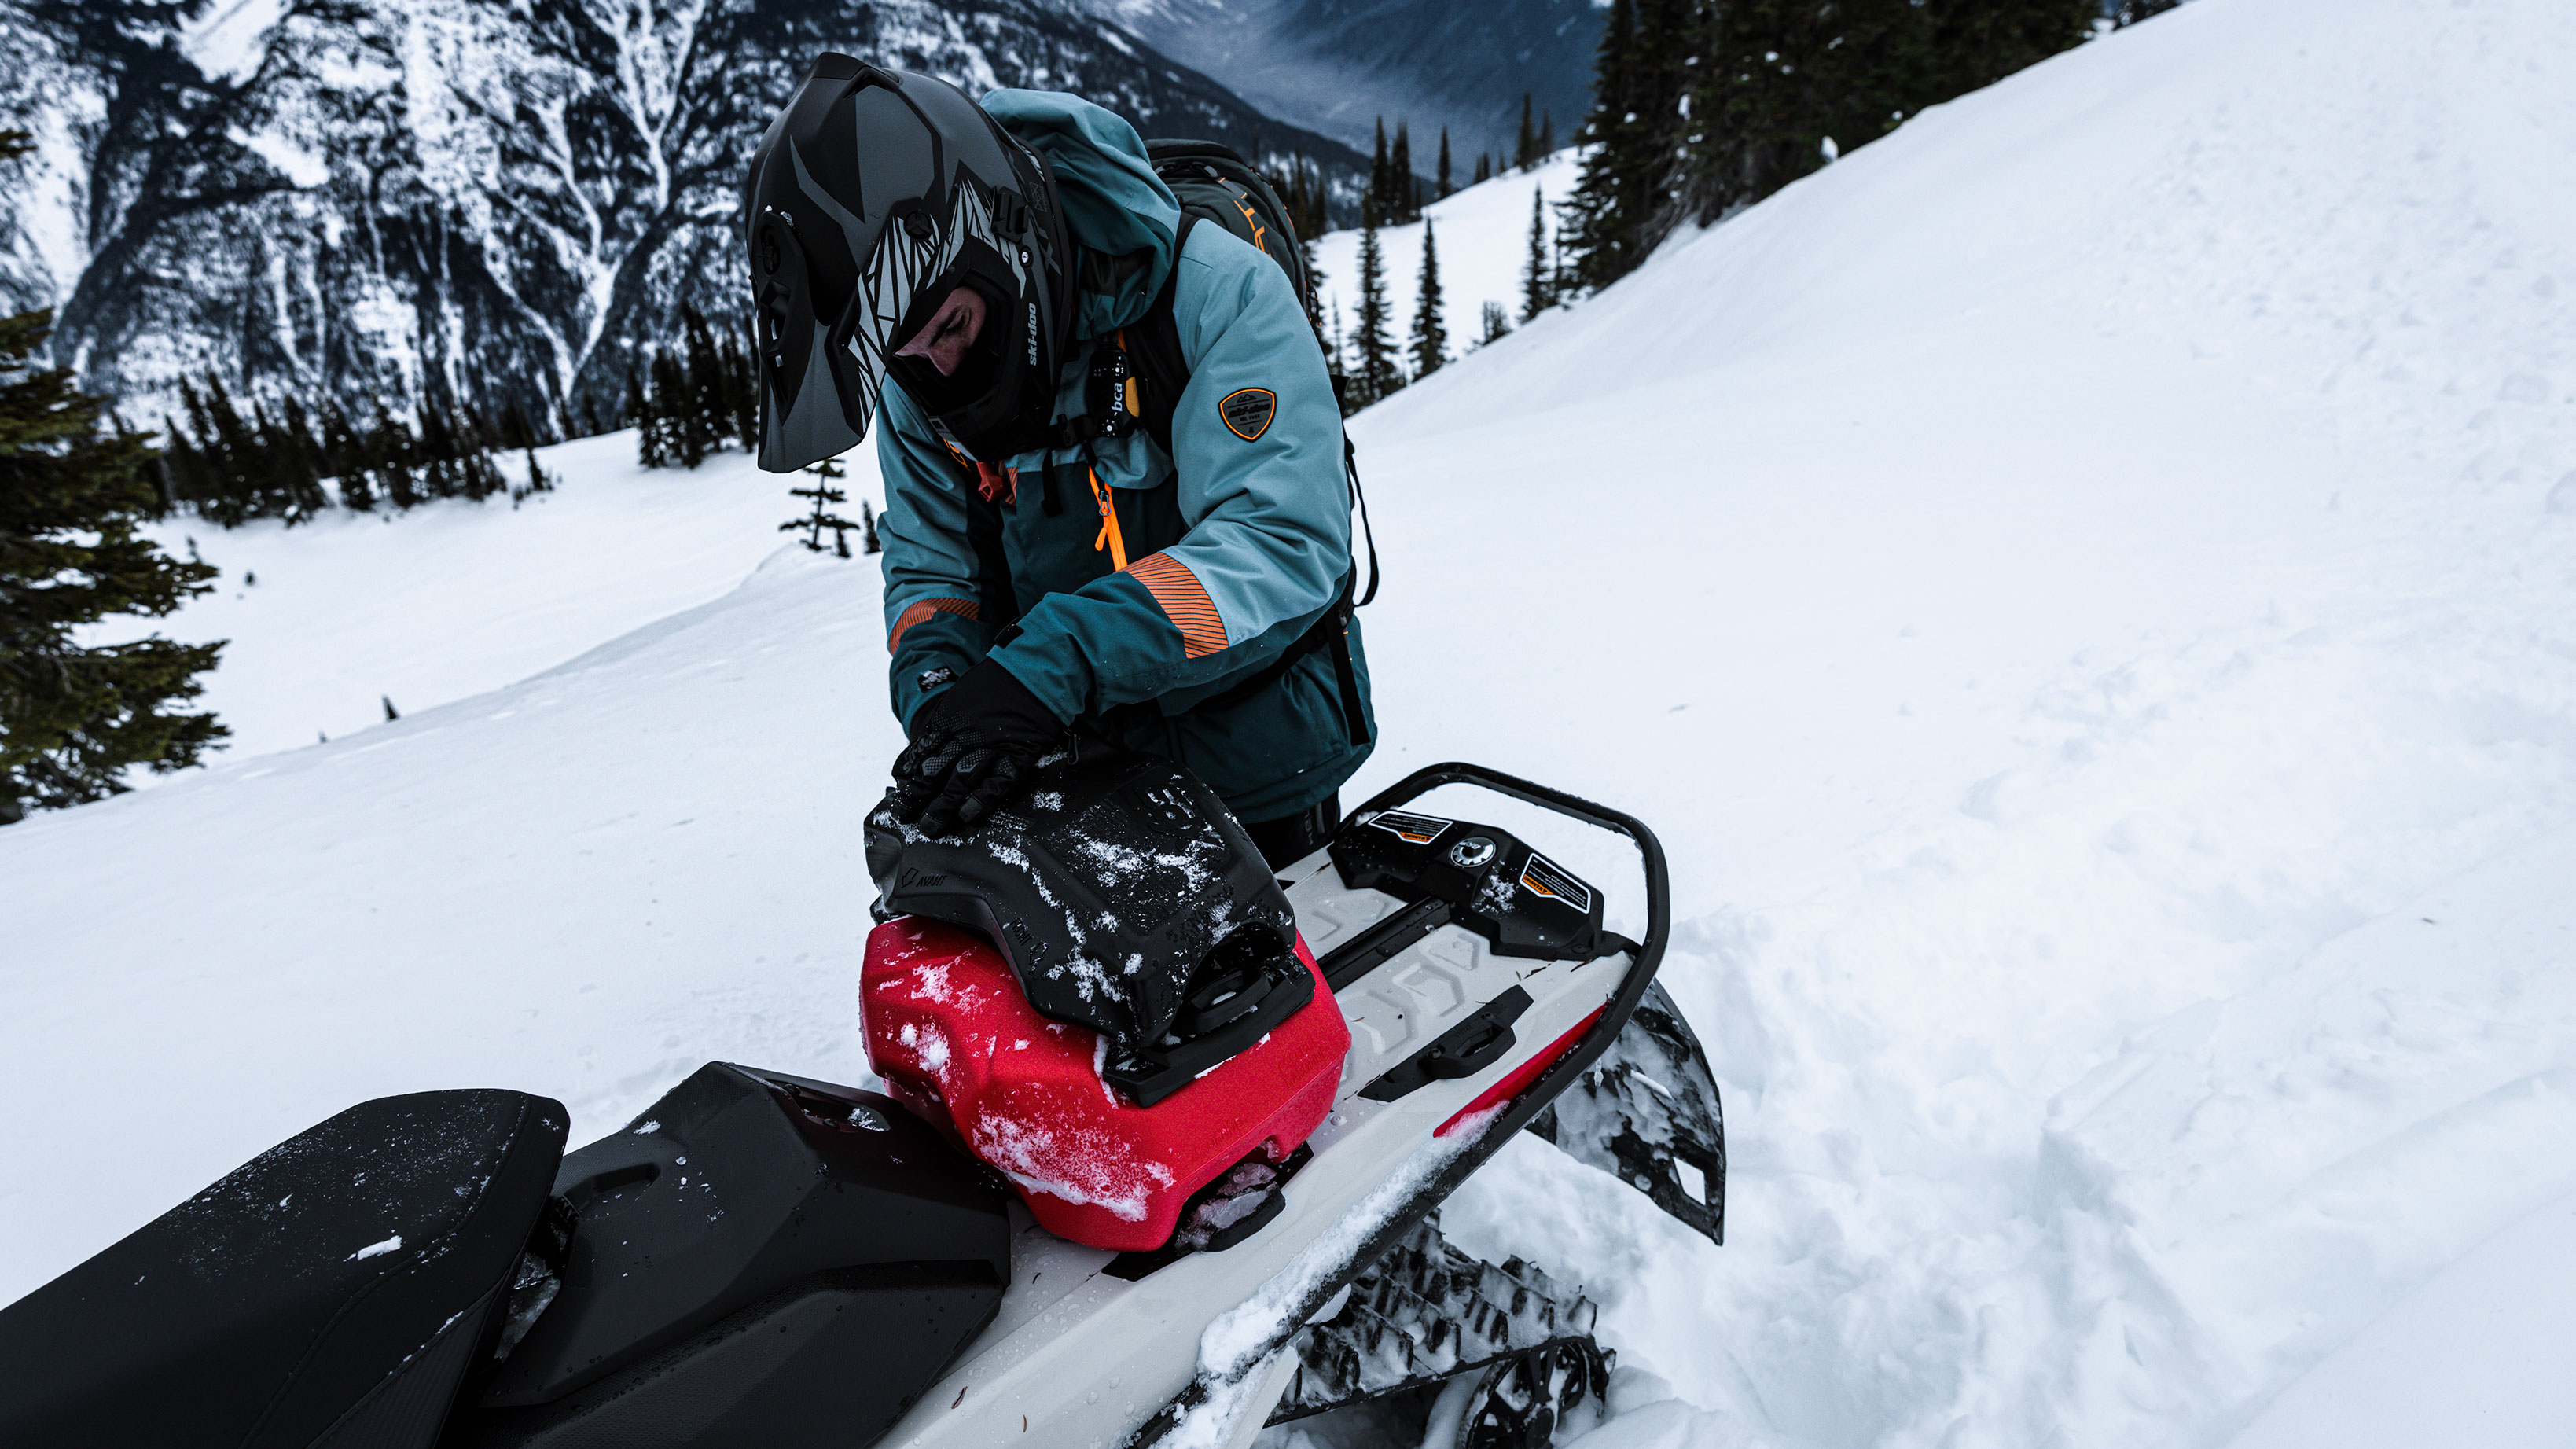 Top 5 must-have accessories for backcountry snowmobiling